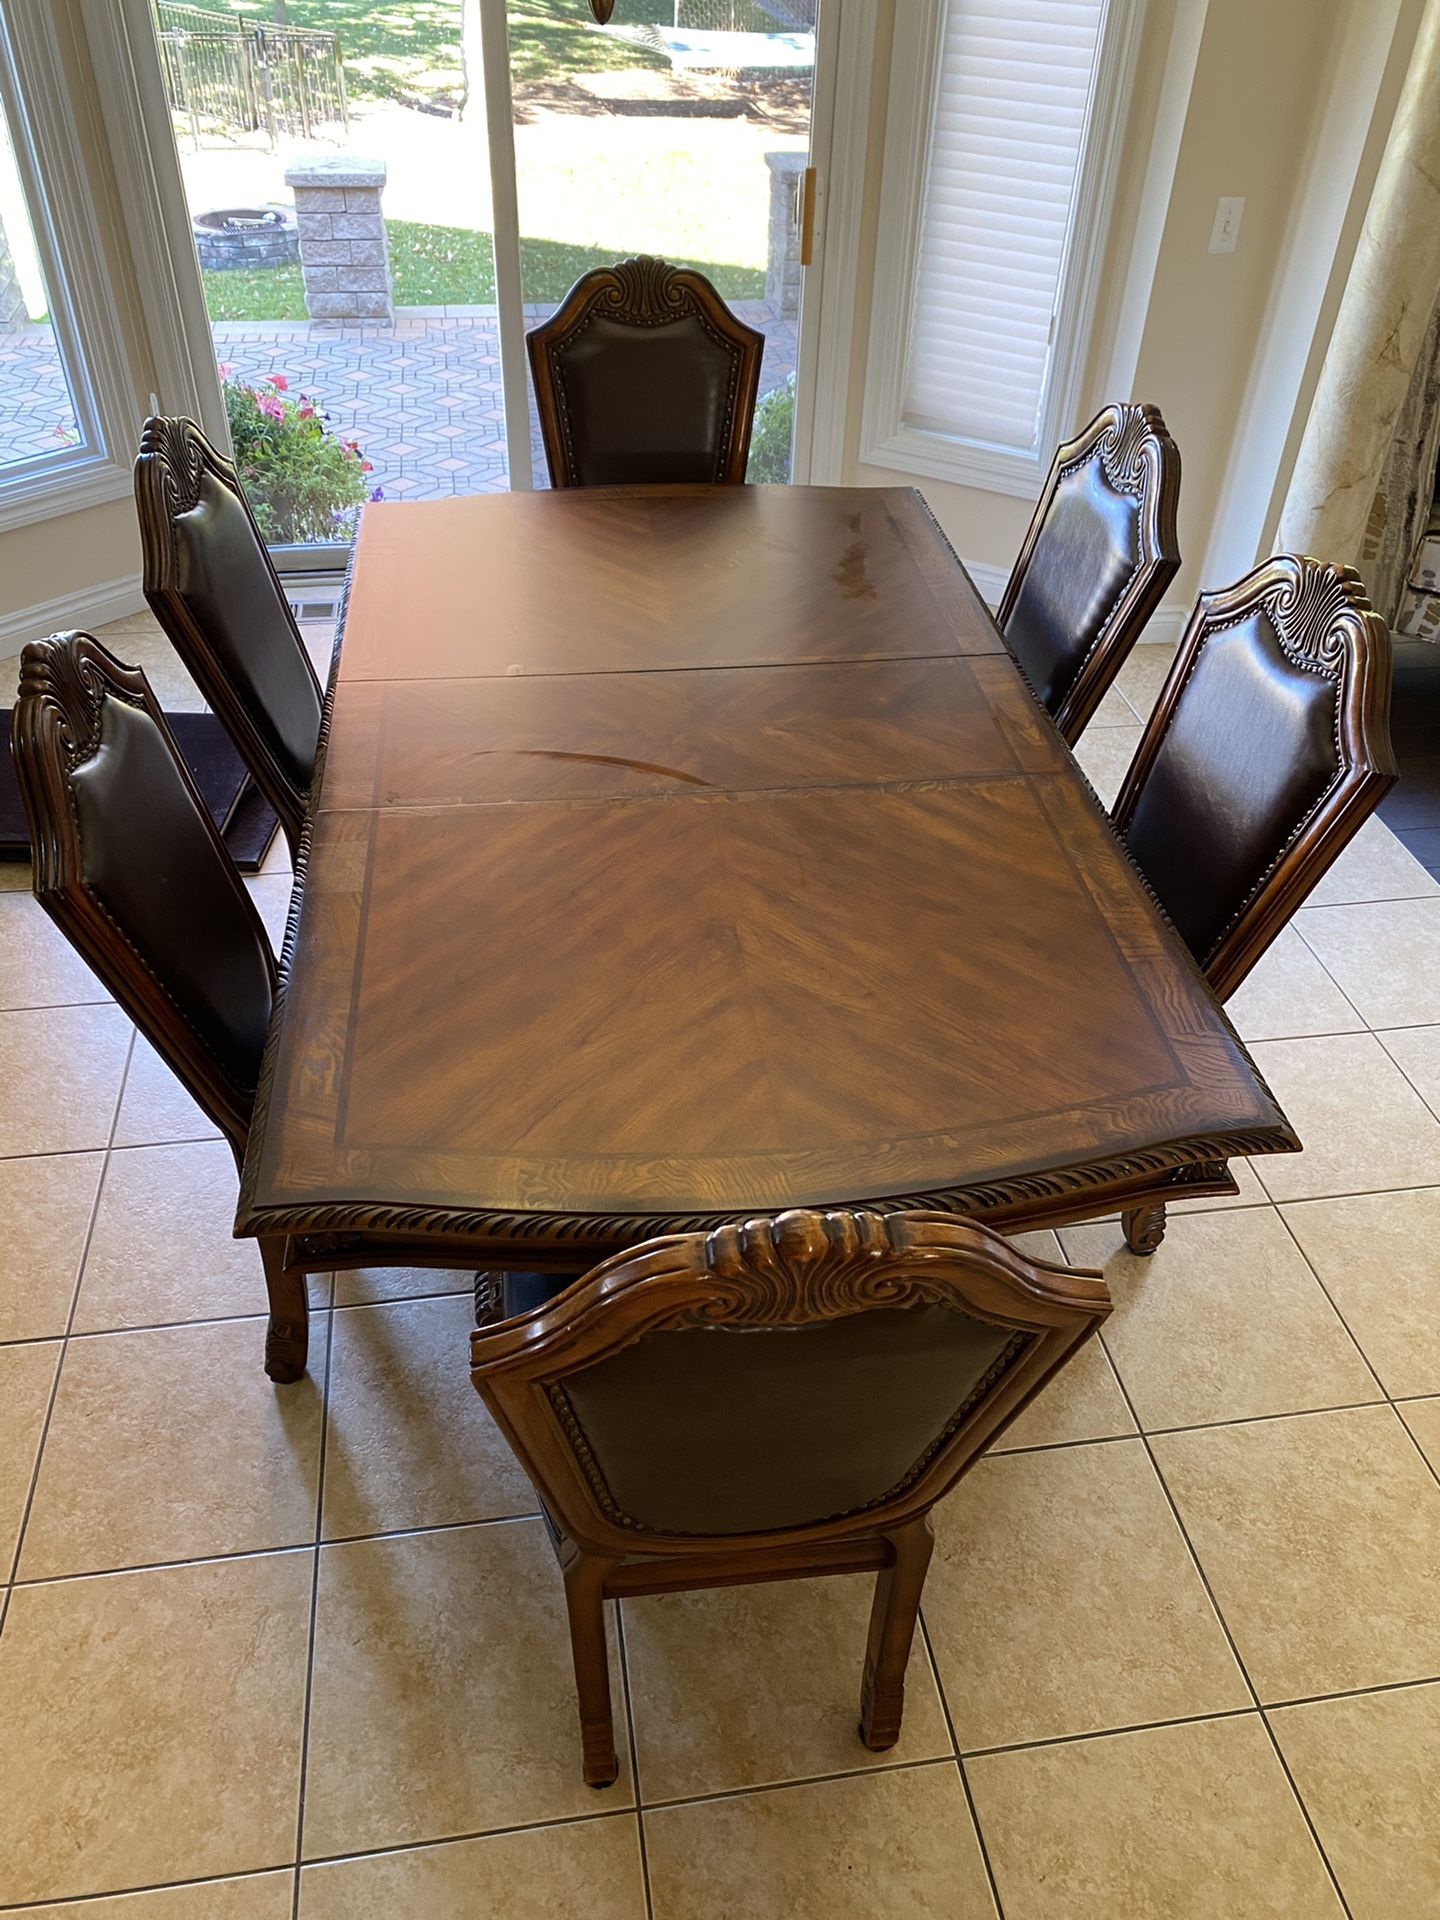 Wood dining room table/ kitchen table